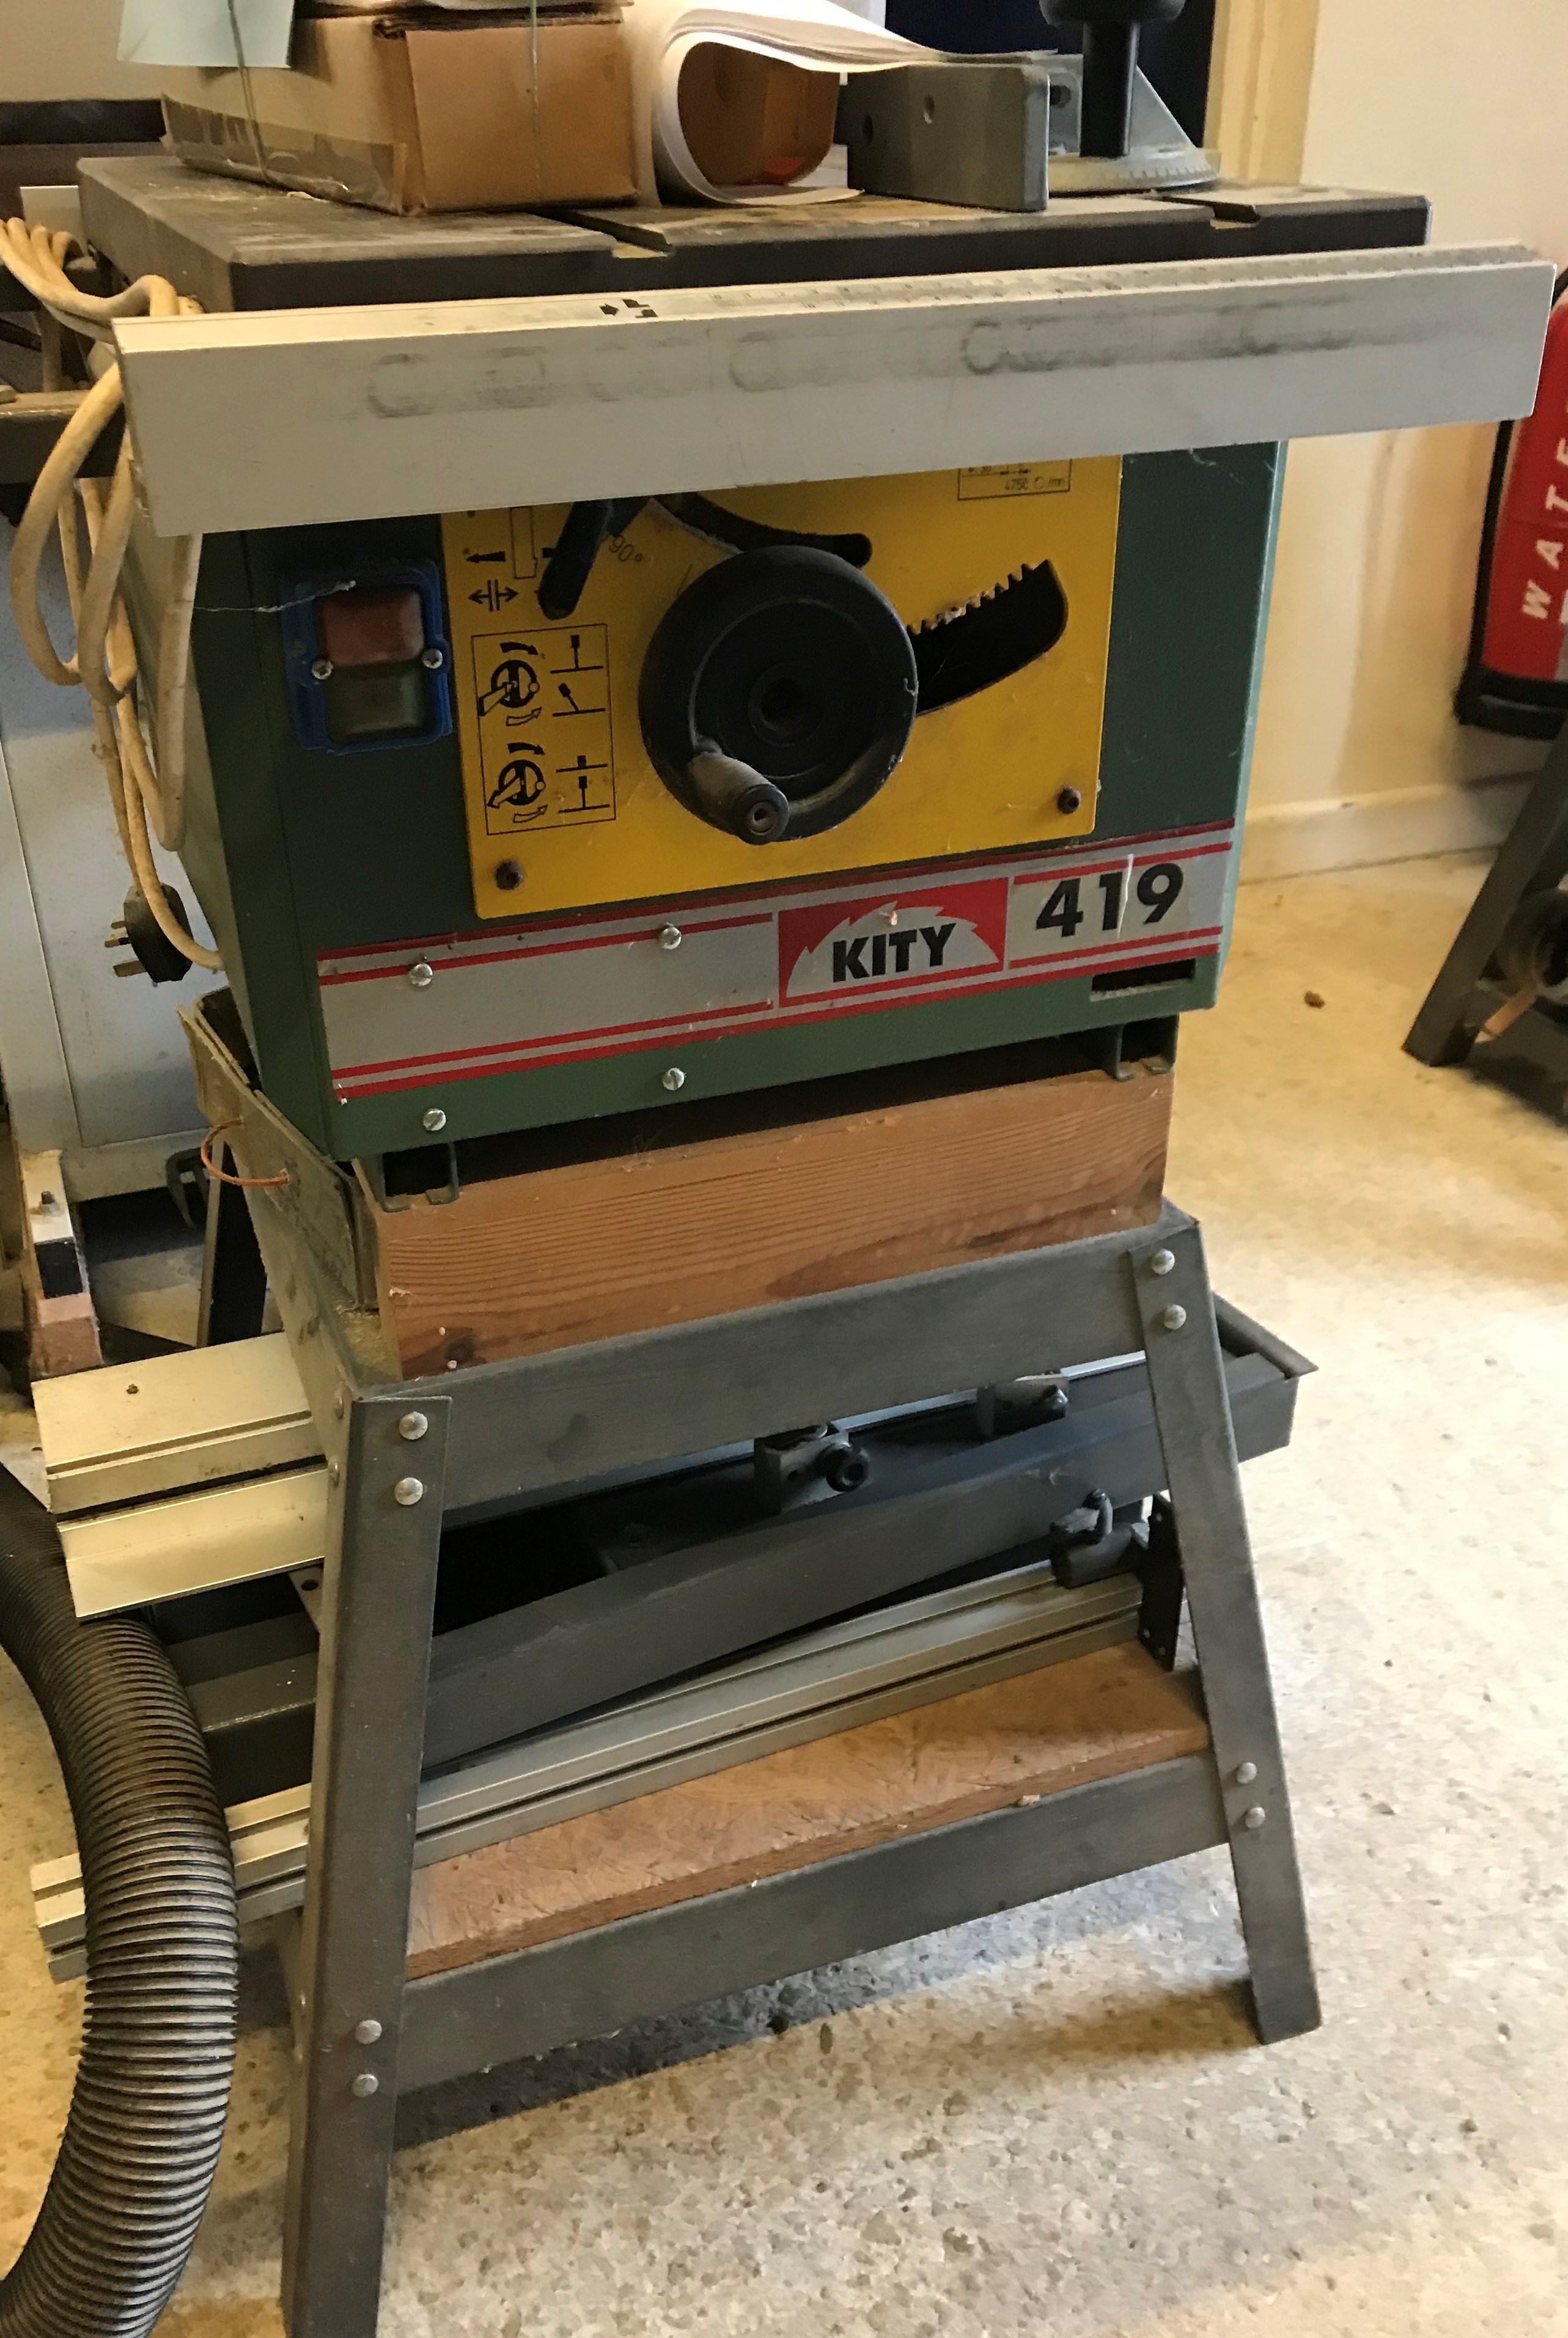 A Kity 419 circular saw on stand